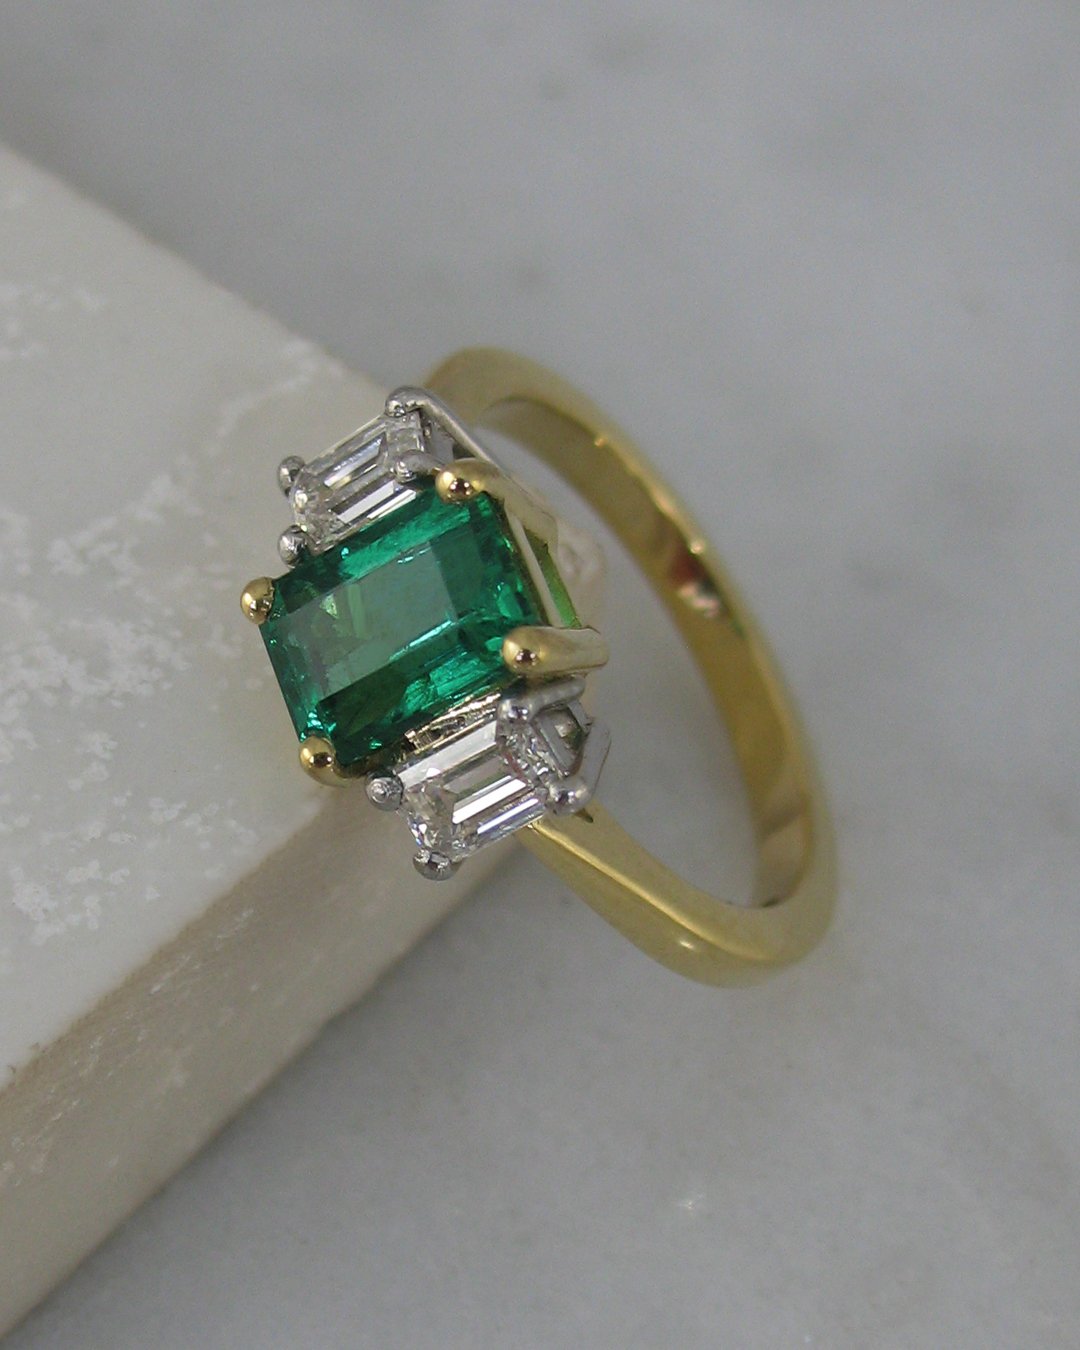 A classic three stone emerald engagement ring